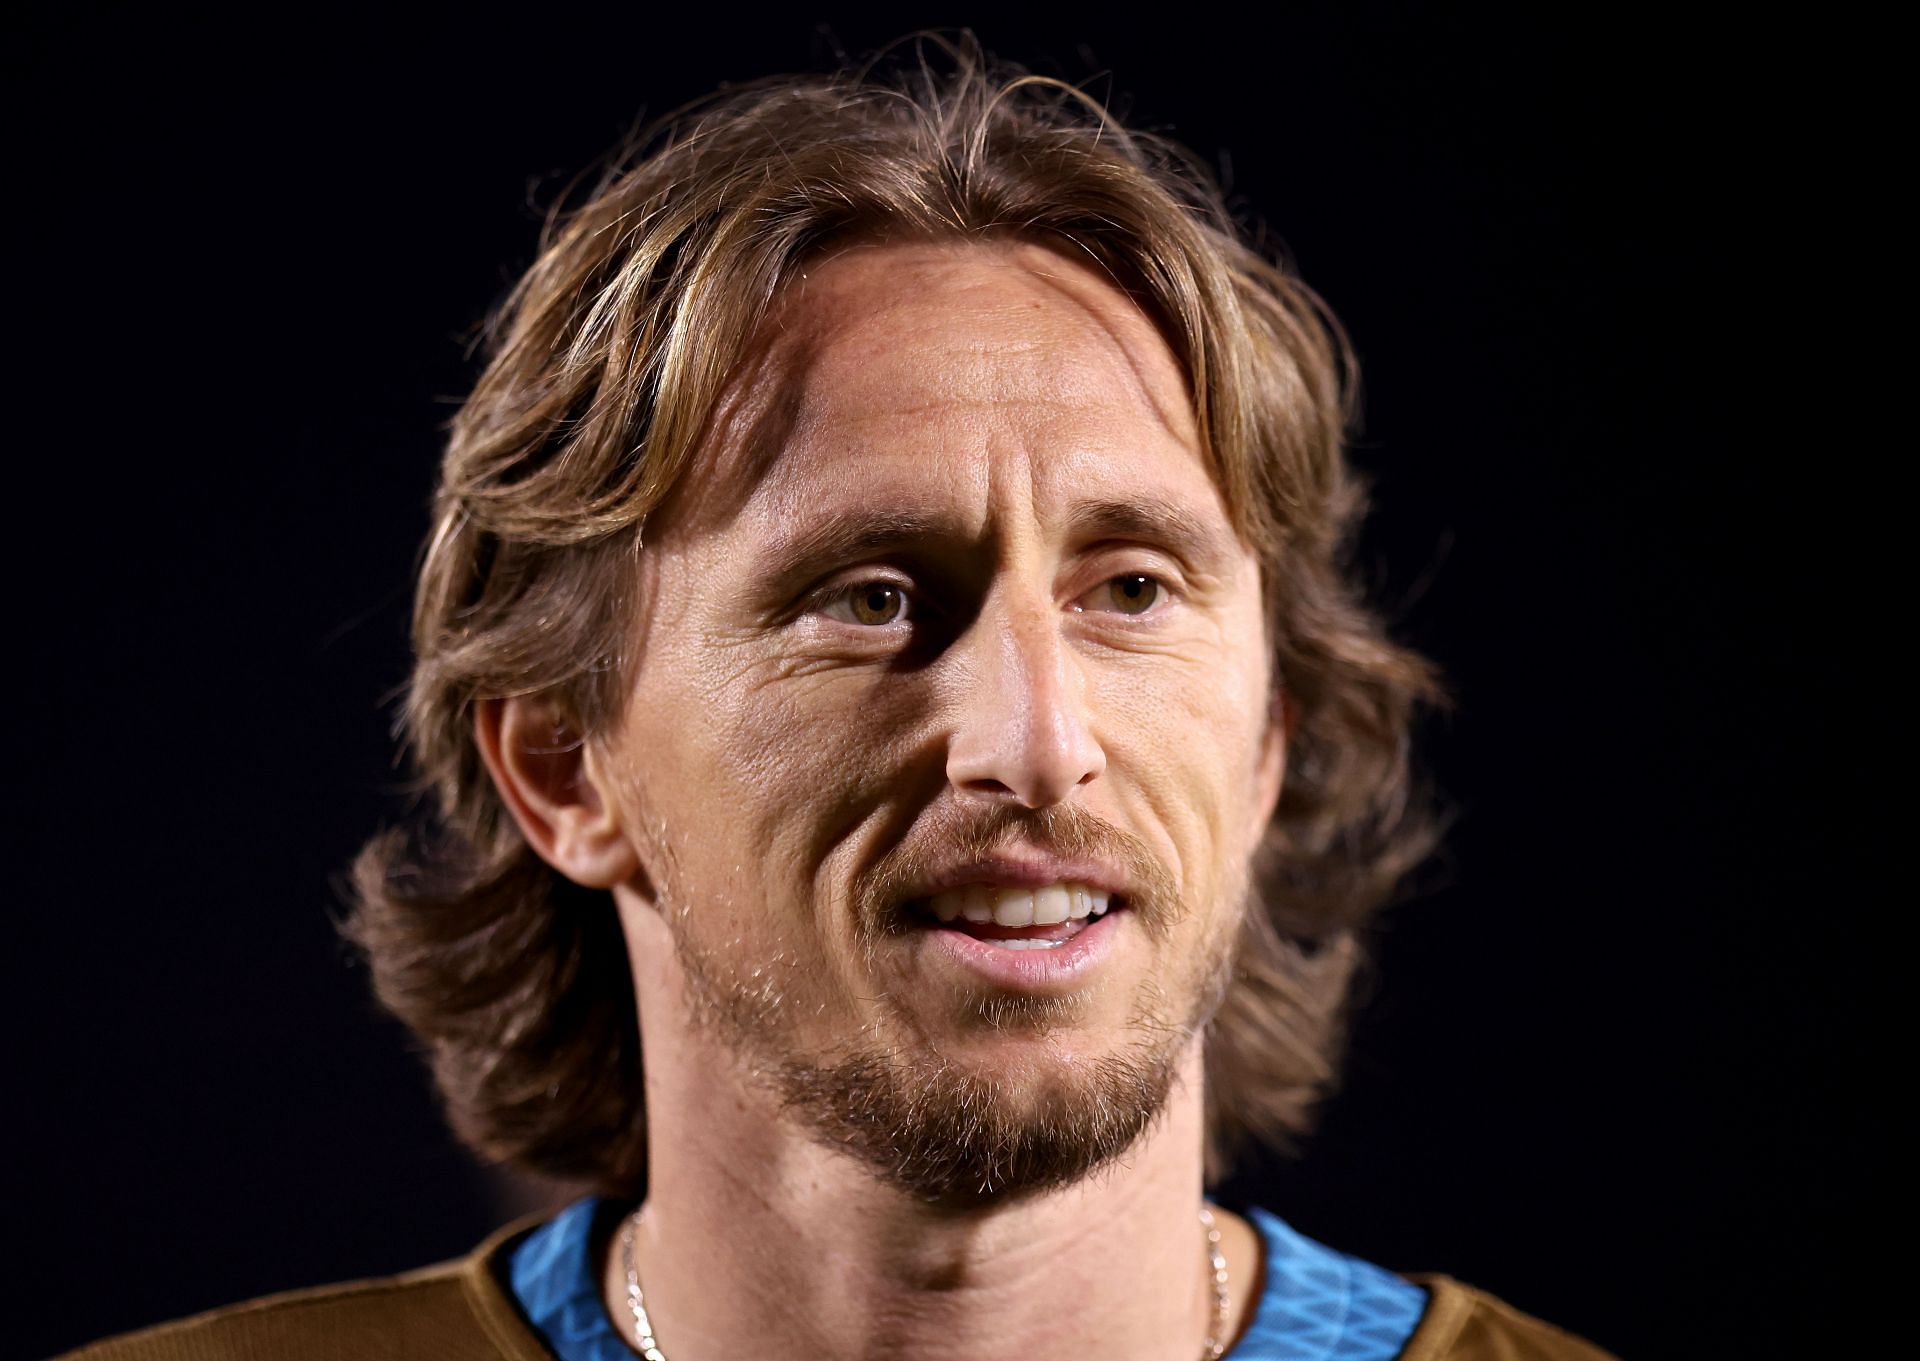 Luka Modric is preparing to face Argentina in the semifinals of the World Cup.